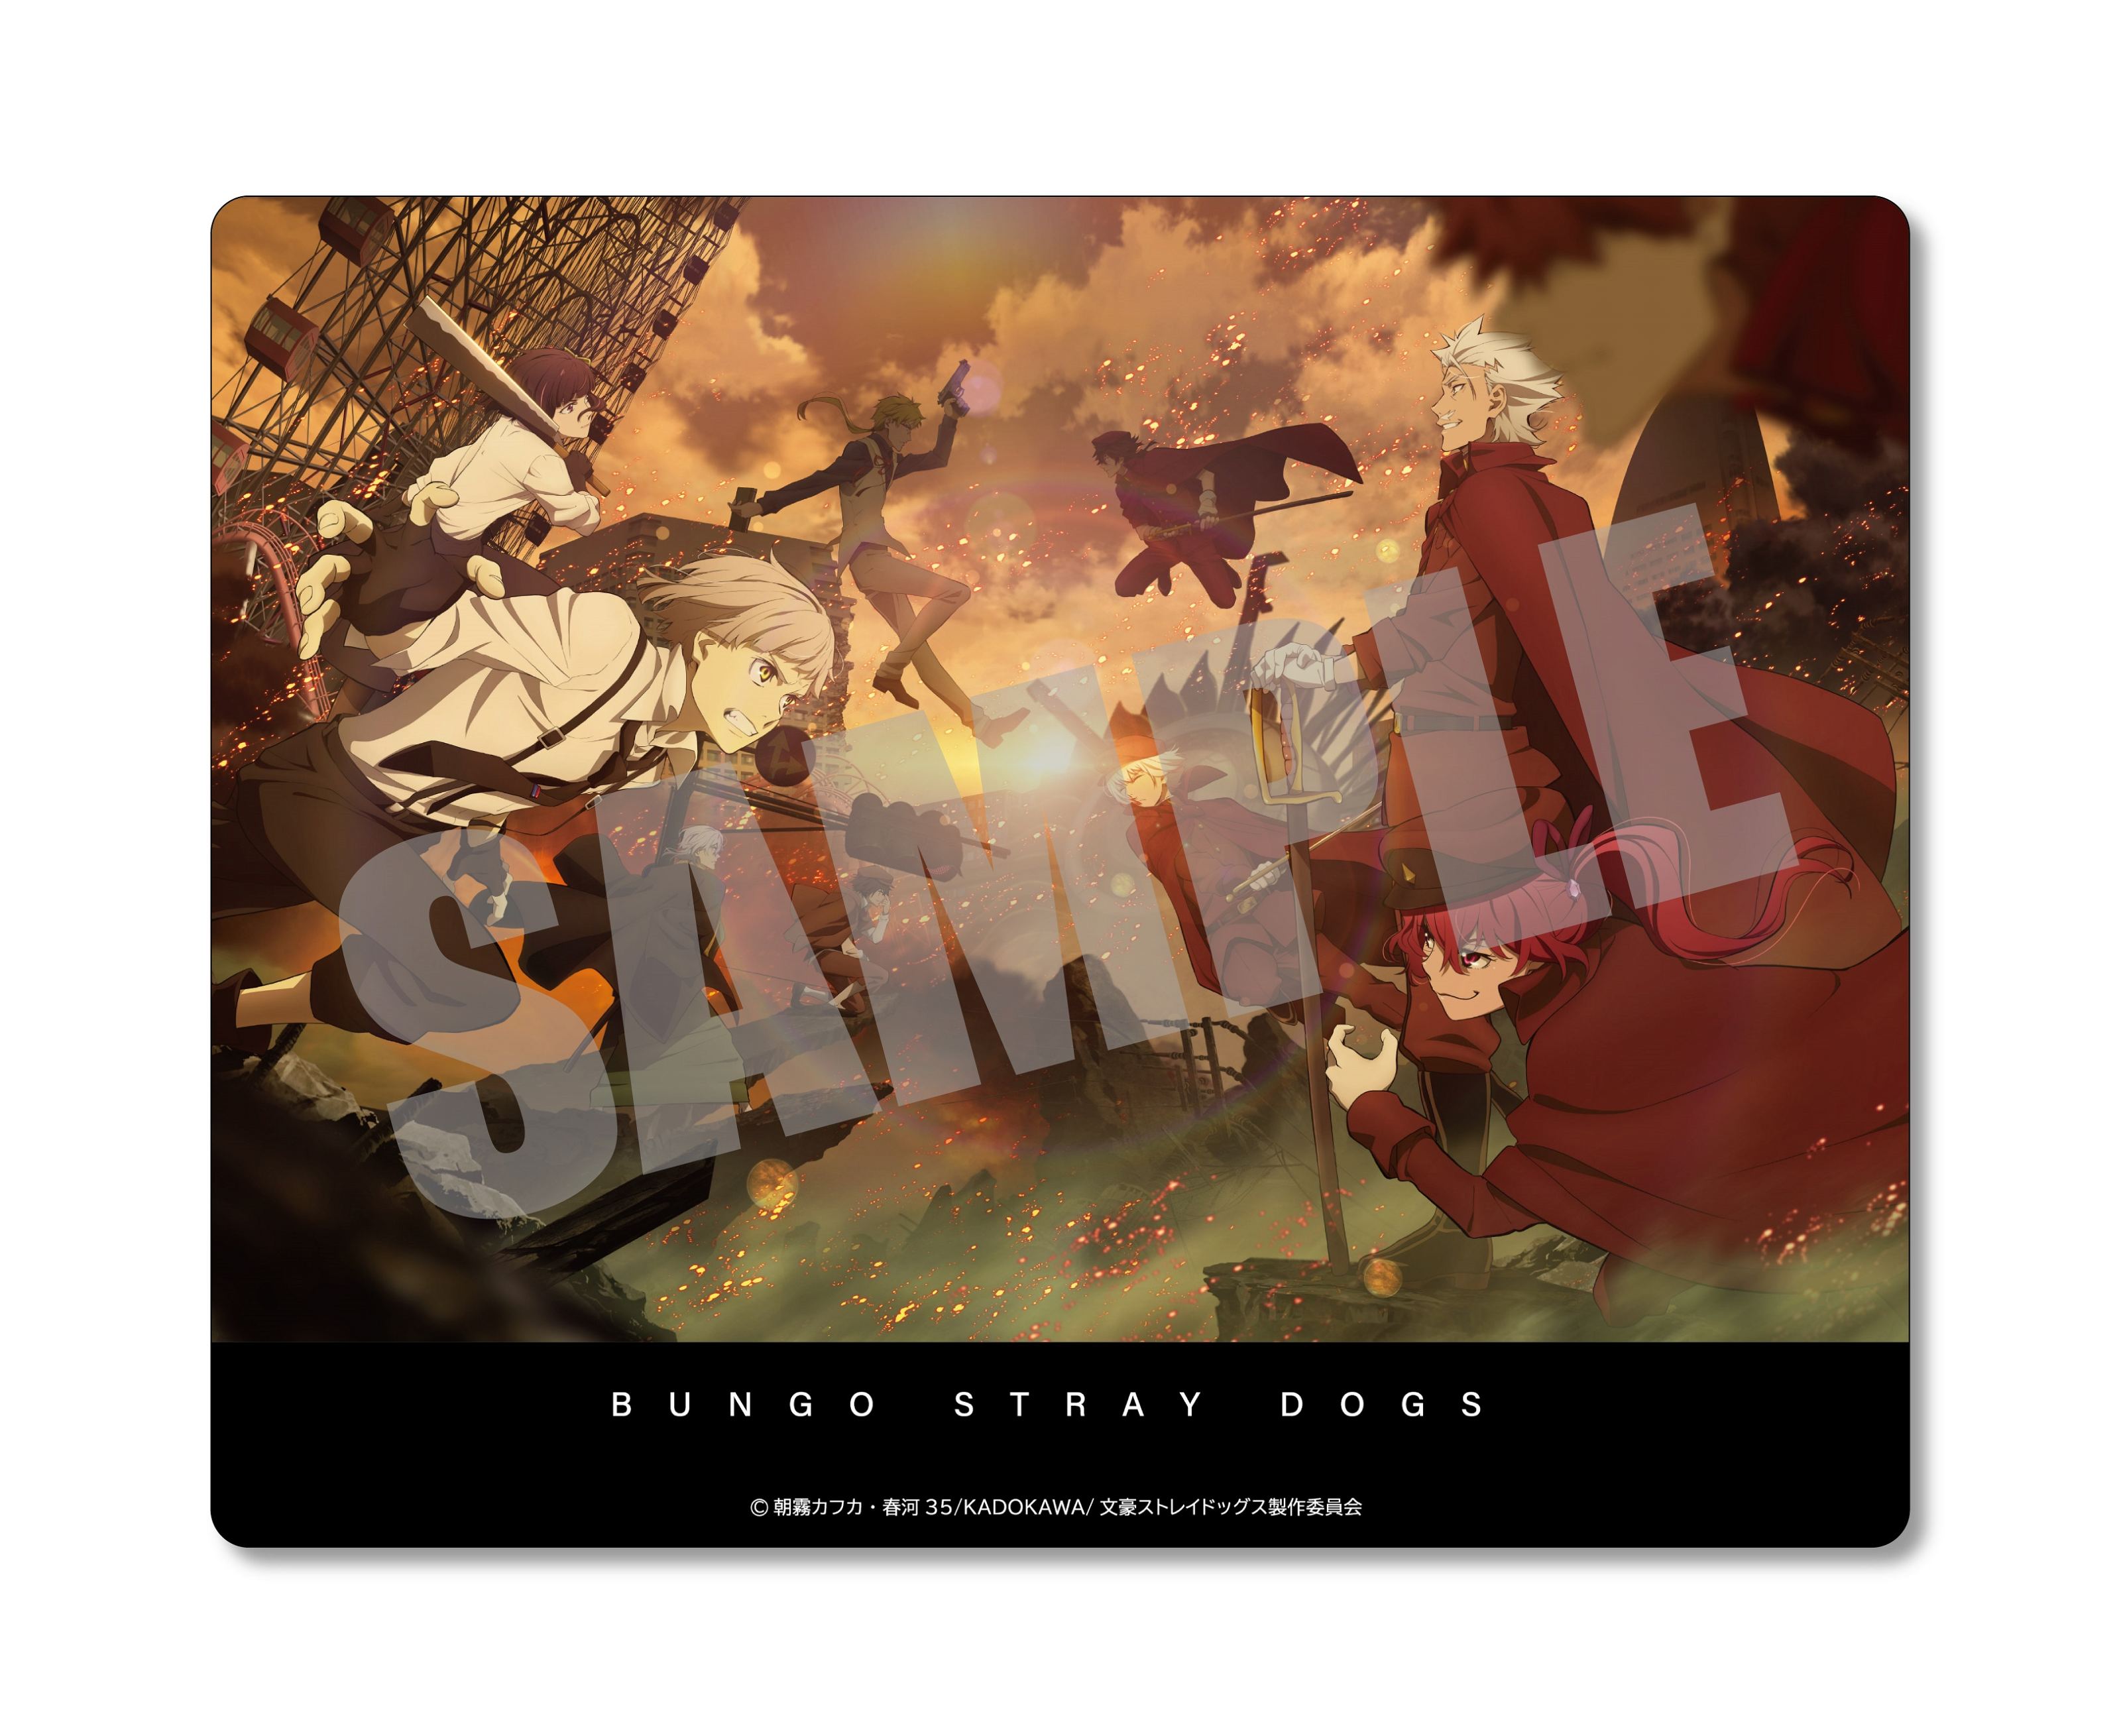 Bungo Stray Dogs Mouse Pad Key Visual Ver. (November, 2023 Edition) Cabinet